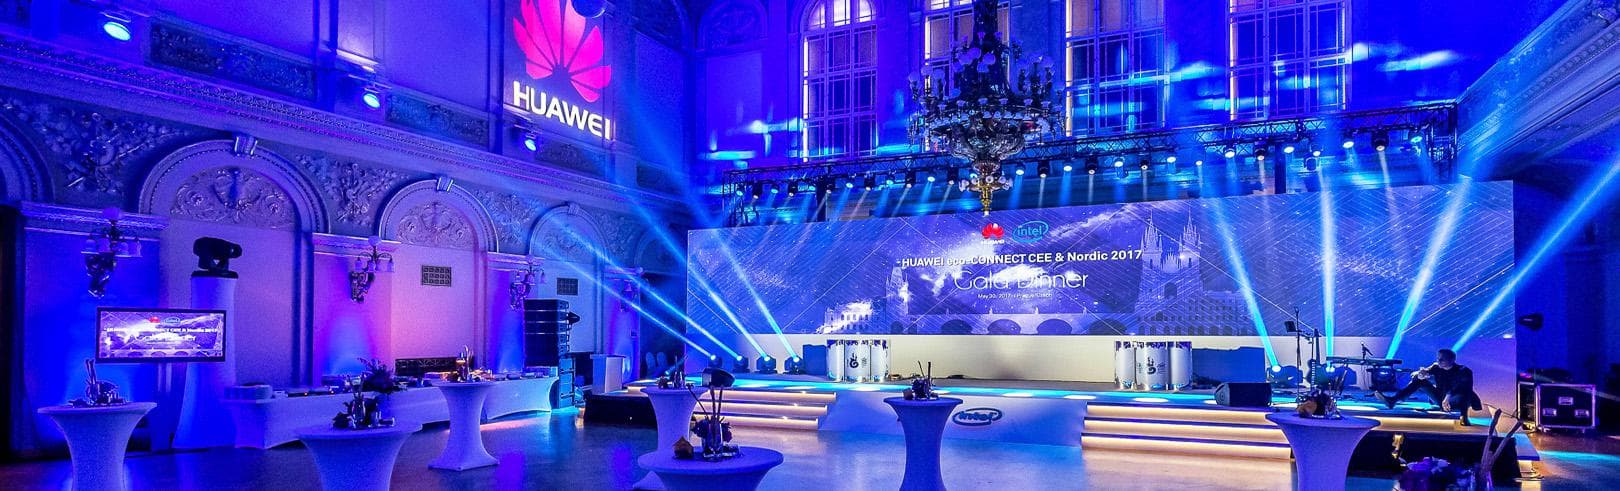 HUAWEI CONFERENCE AND GALA DINNER